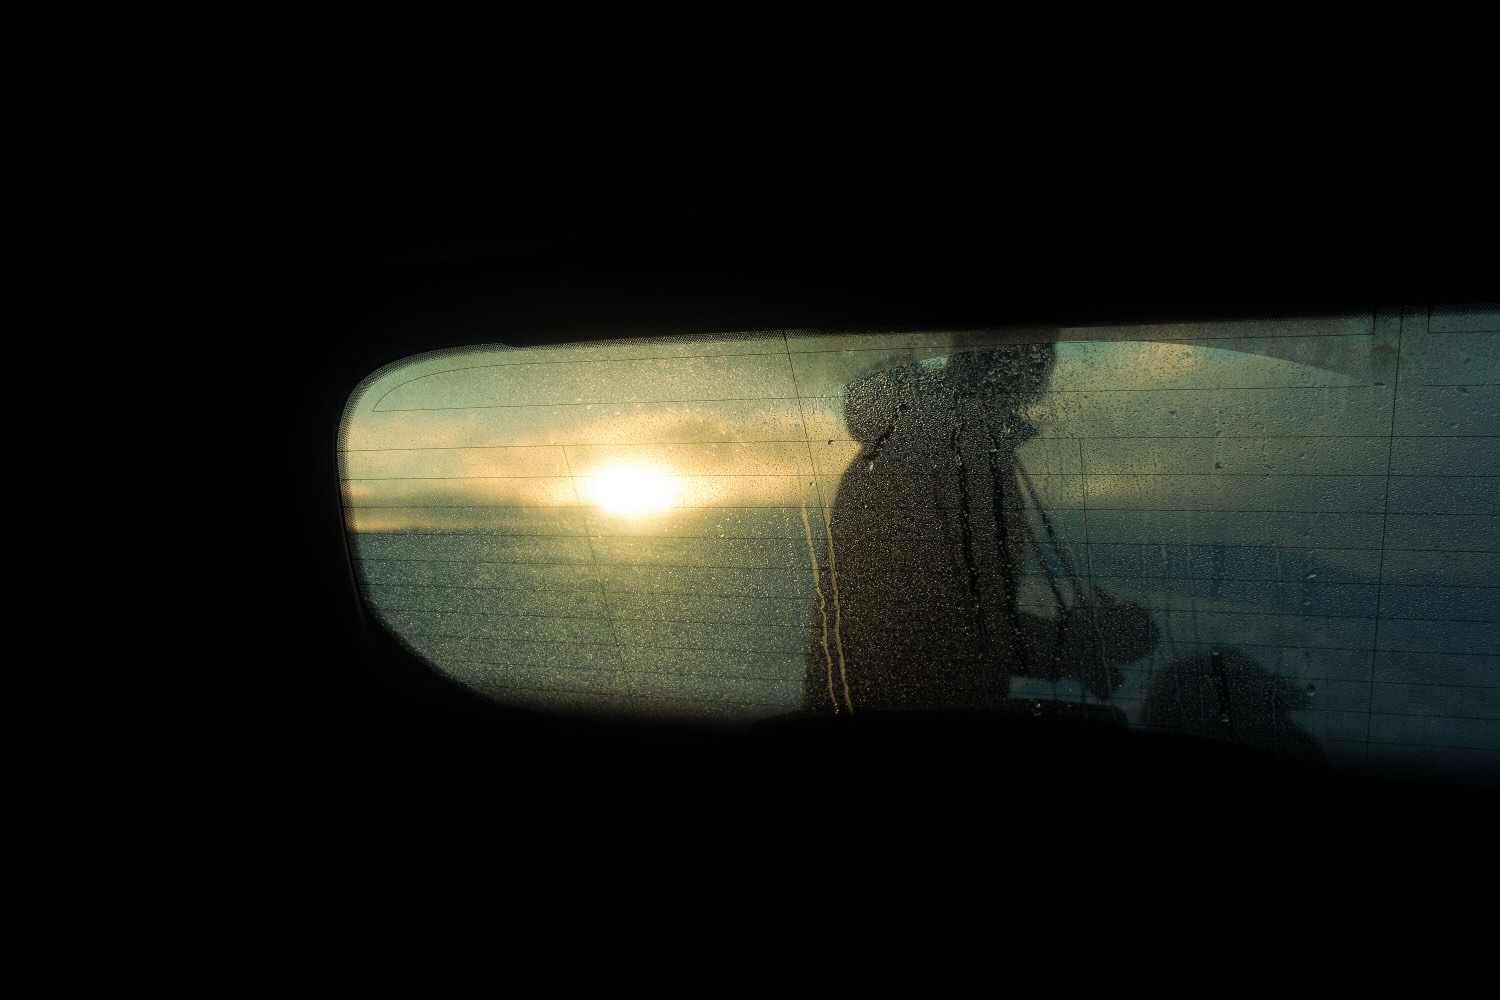 A person walking in front of the sun, seen through the back of a car